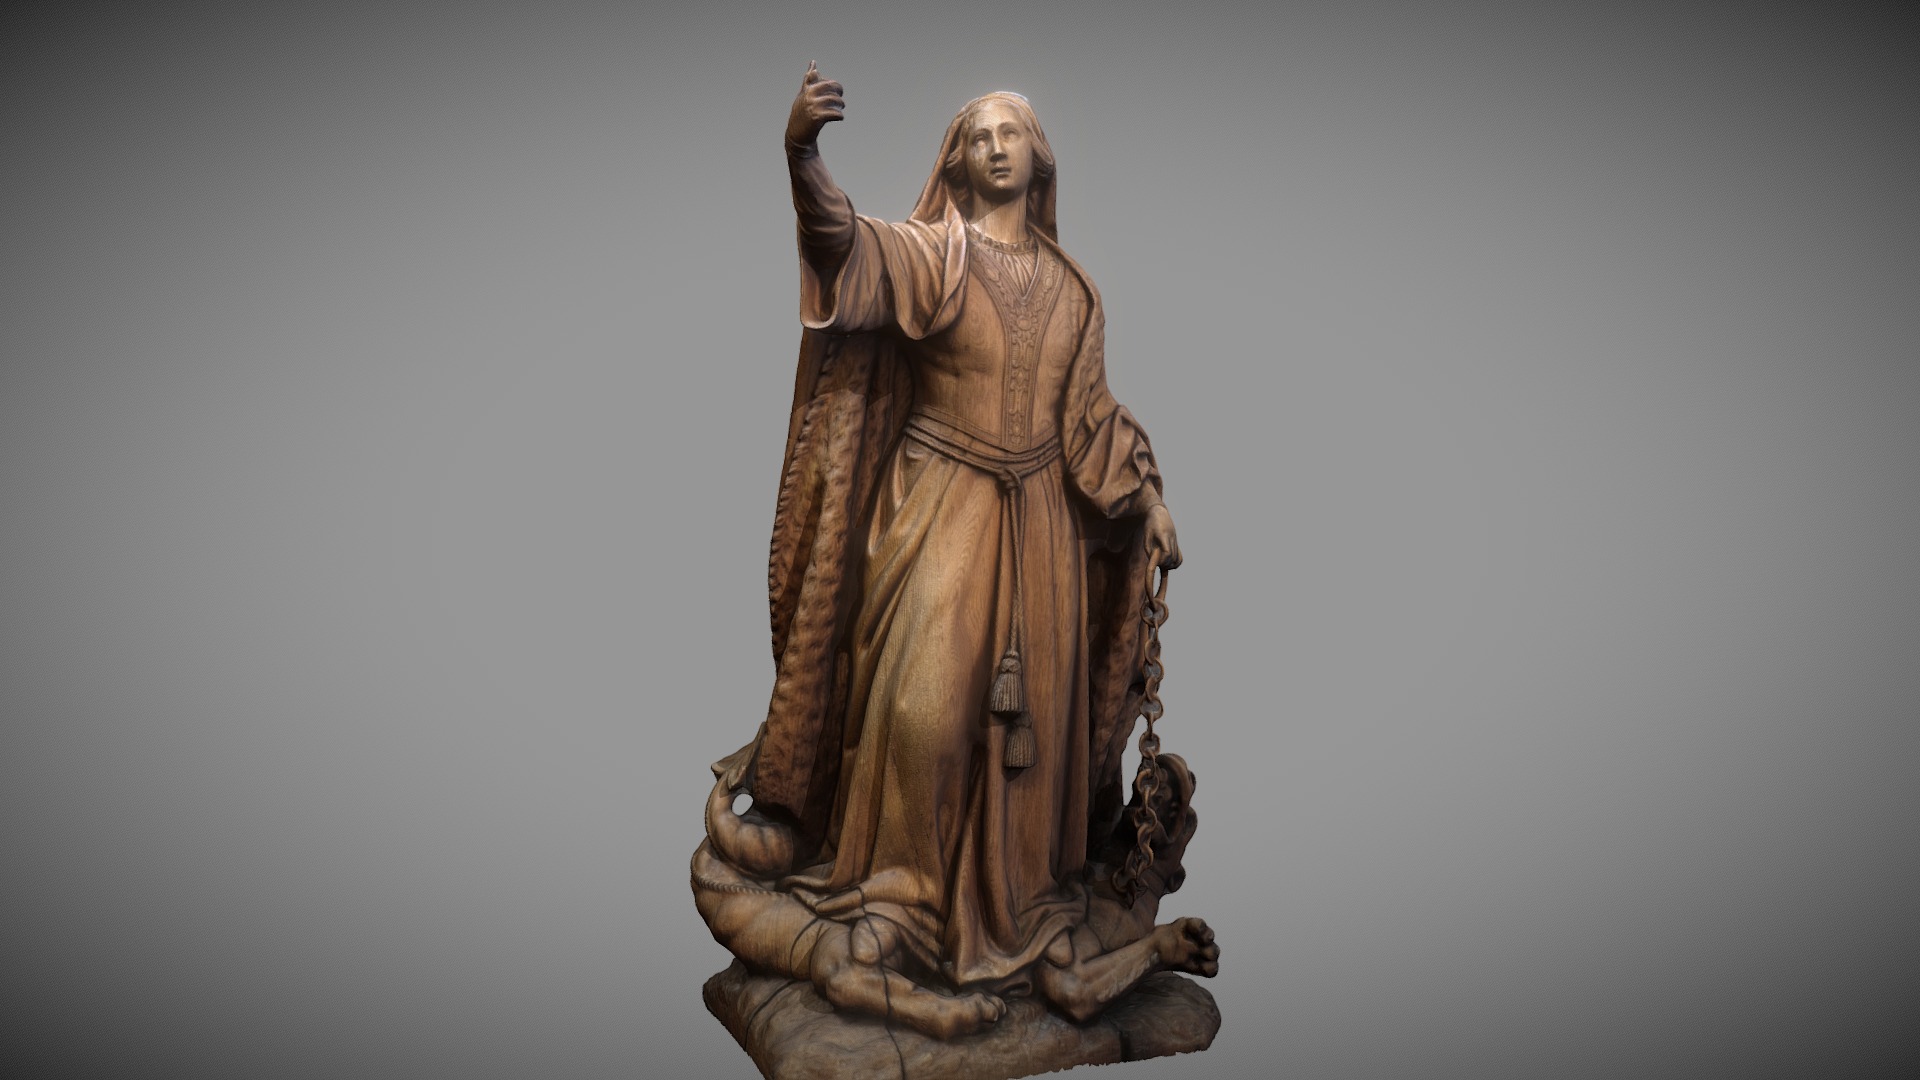 Saint Margaret of Antioch, also known as Saint Marina the Great Martyr, Church Saint-Quentin (Tournai). Made with CapturingReality.

For more updates, please consider to follow me on Twitter at @GeoffreyMarchal 3d model